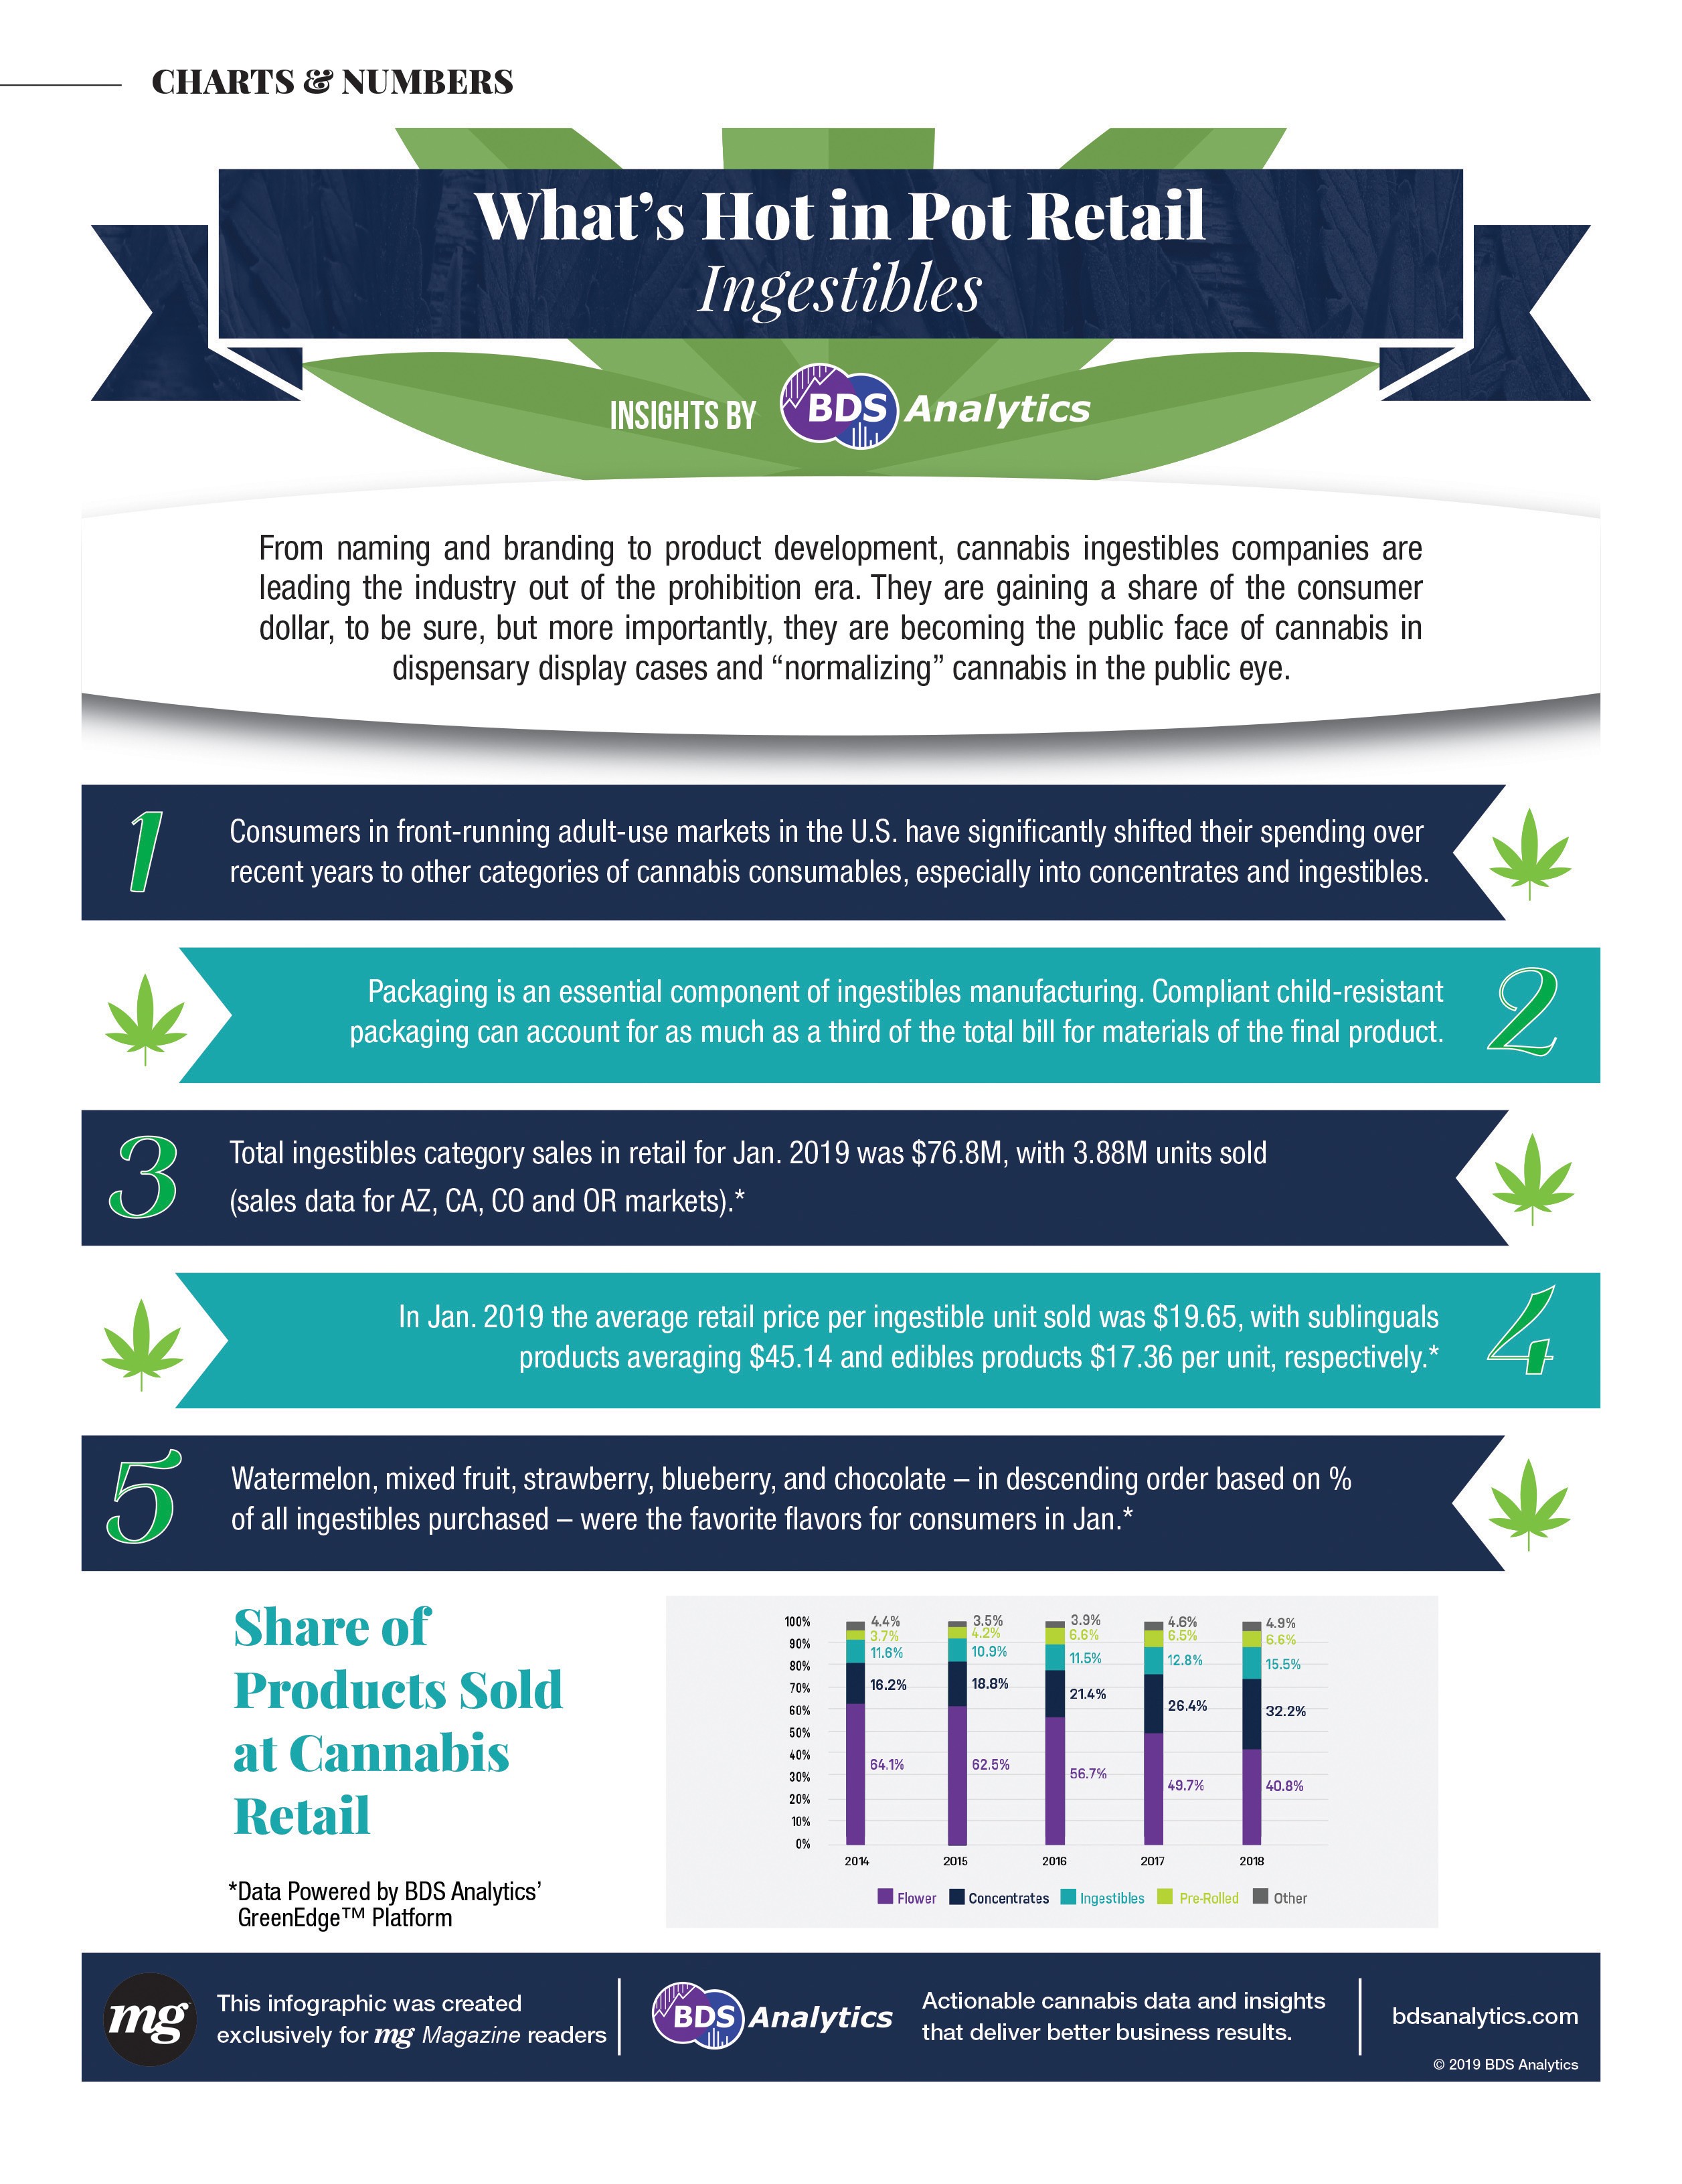 Infographic showing what's hot in pot retail for the ingestibles category